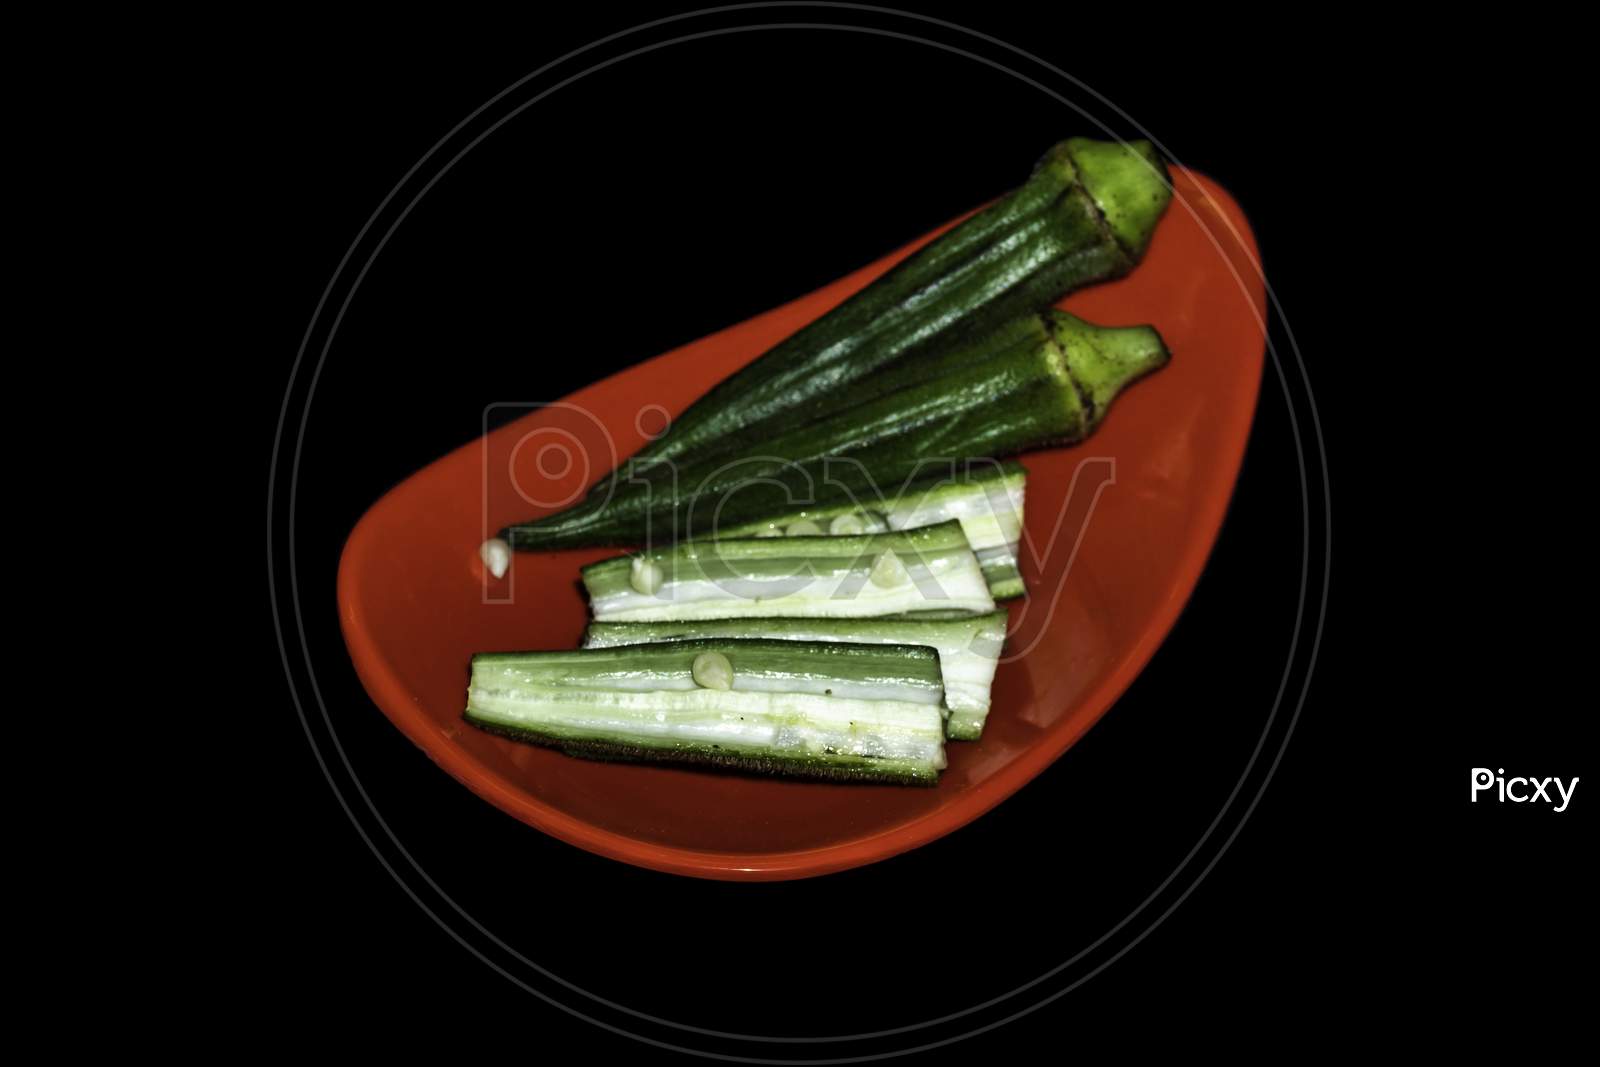 Red Plate of Lady Finger seed on Center Isolated in black background